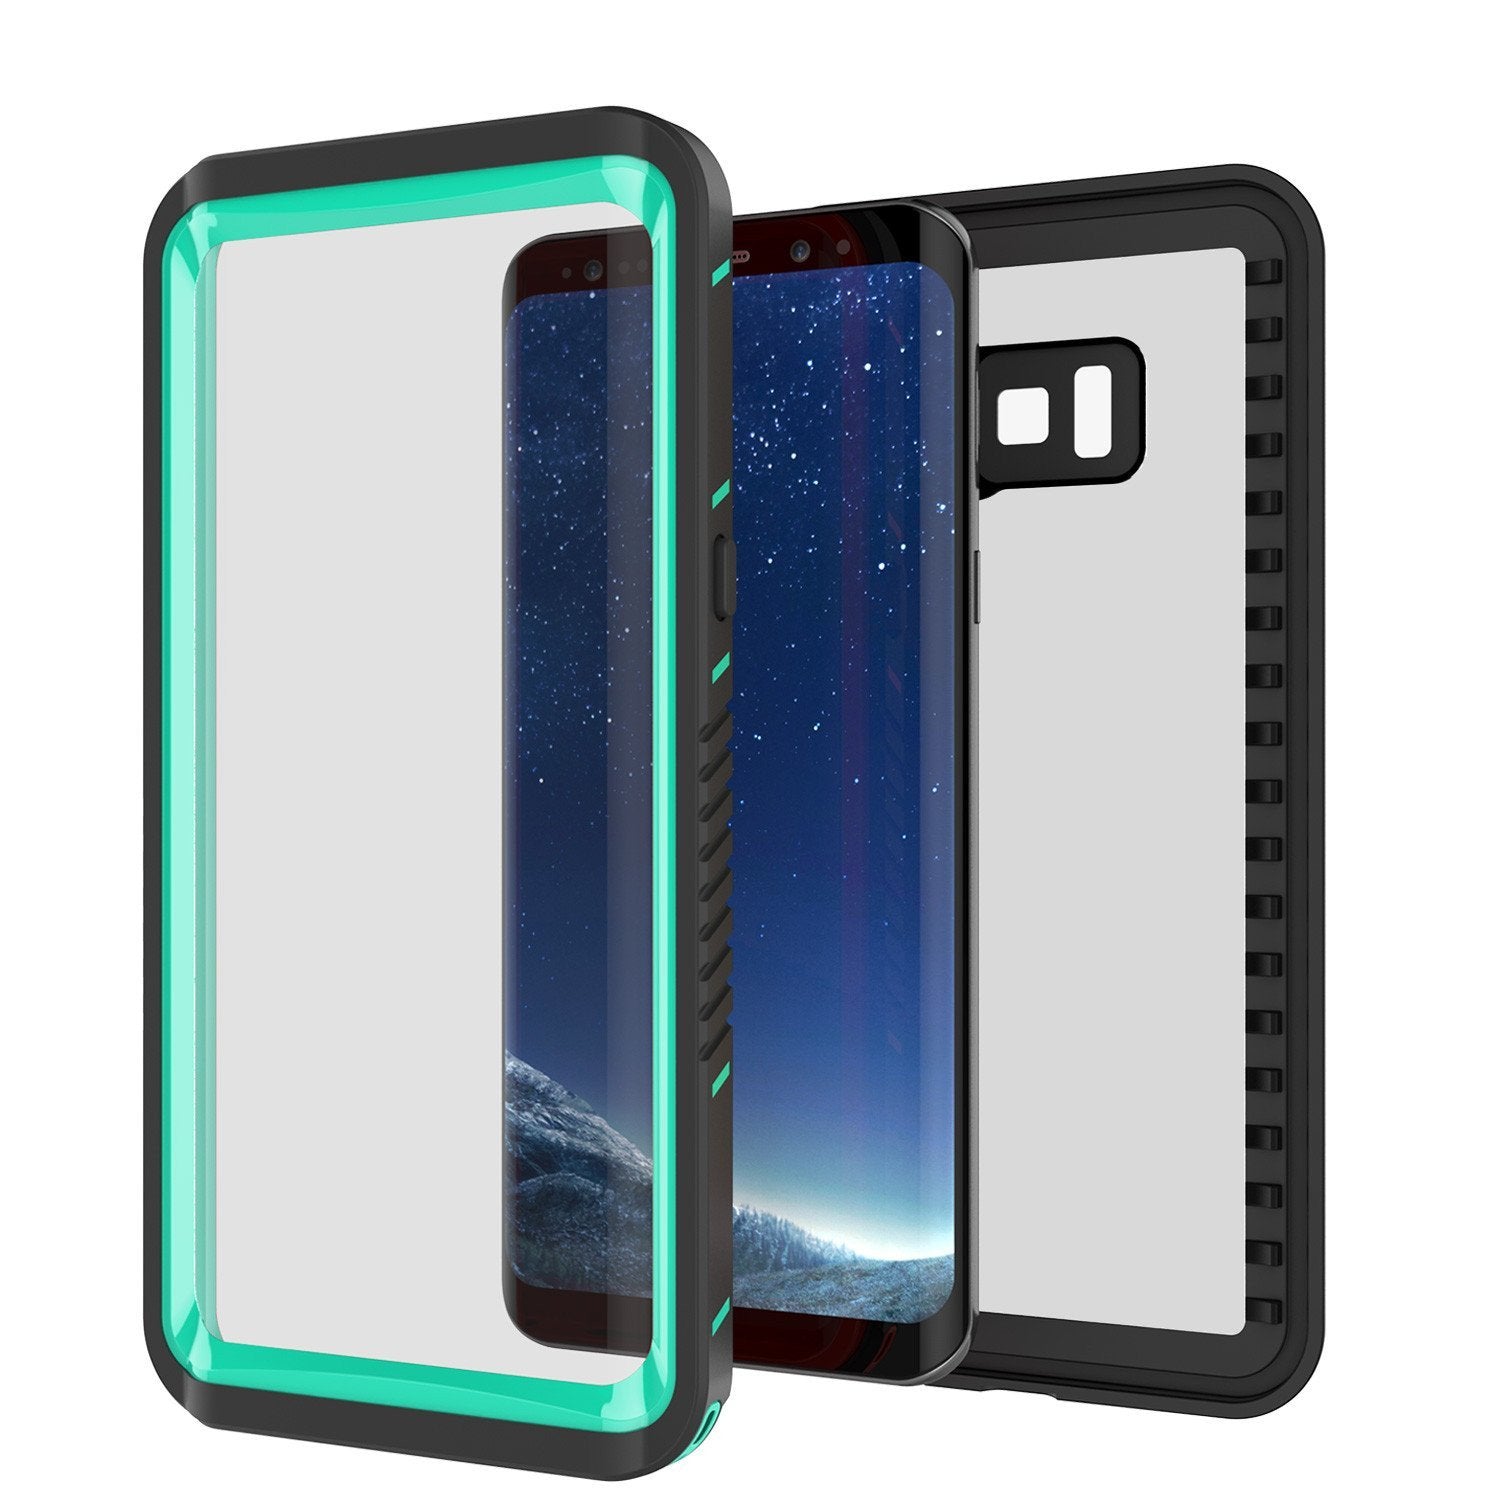 Galaxy S8 Plus Punkcase Extreme Series Slim Fit Armor Case [Teal]